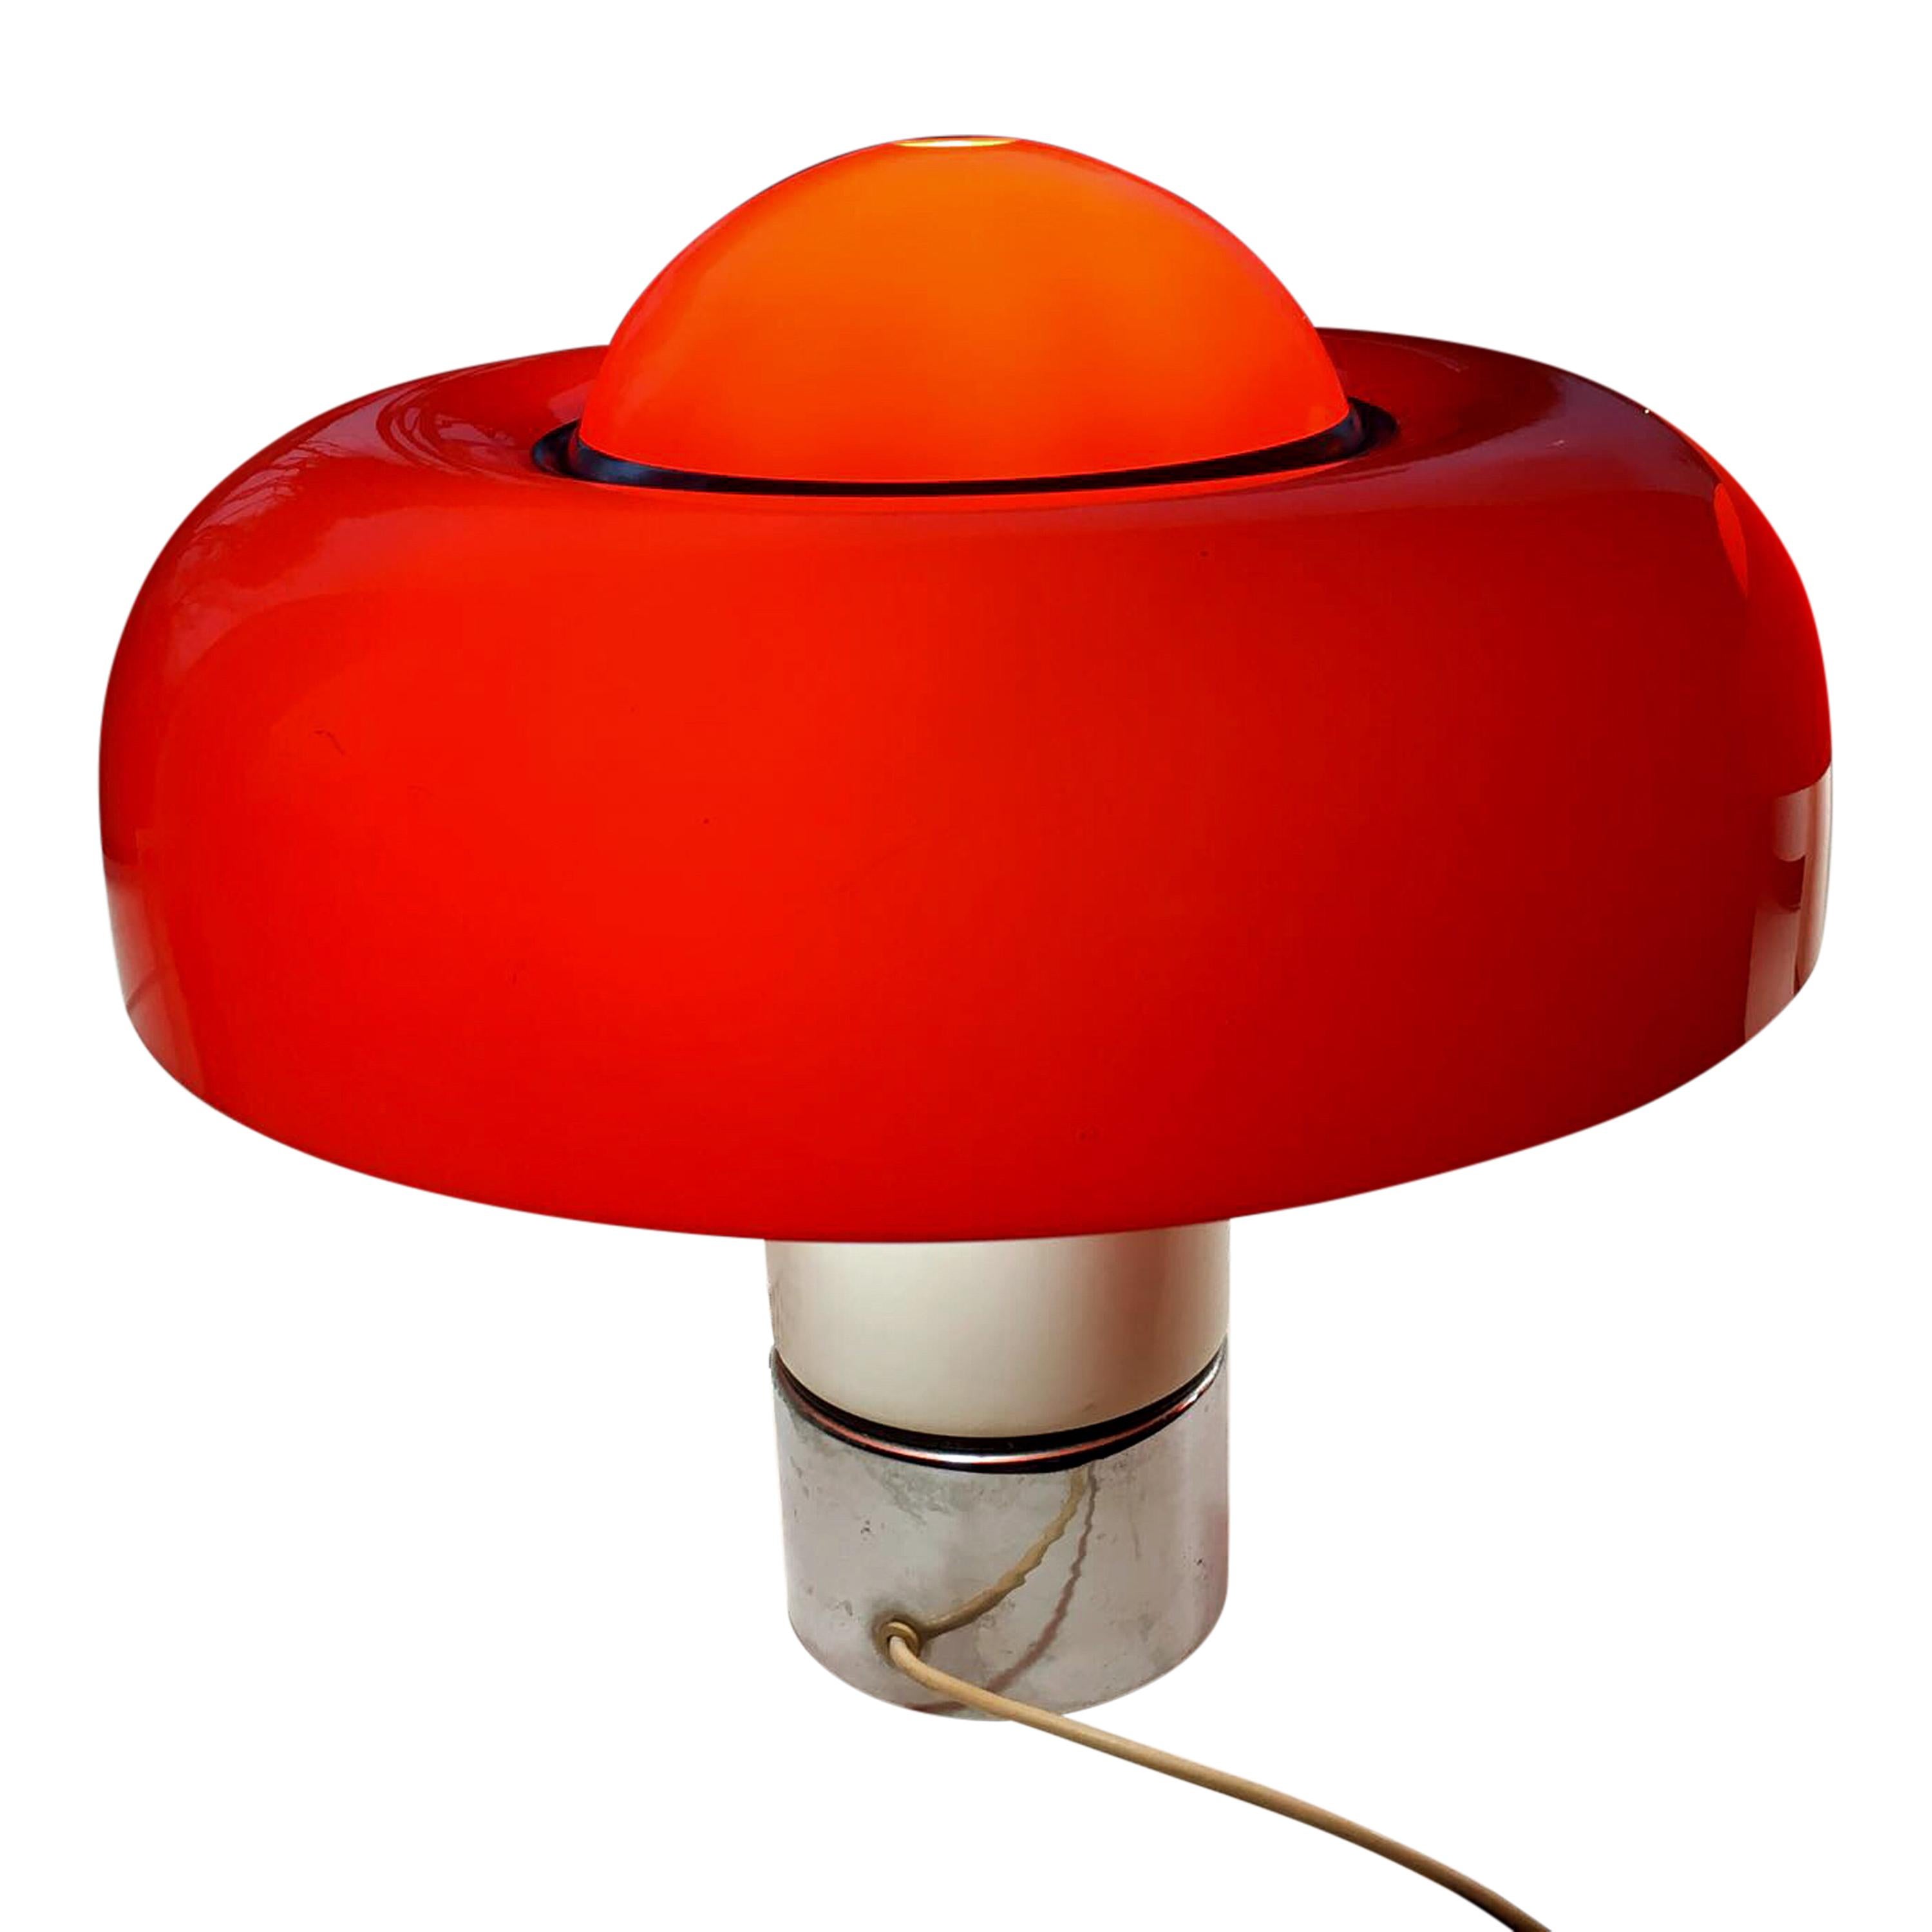 Pair of “Brumbury” table lamps designed by Luigi Massoni, manufactured in 1969 by Harvey Guzzini, Italy. Heavy foot of metal (white varnish and chrome-plated), the shade is made of orange opal acrylic.
One of the two lamps shows a slight bump of